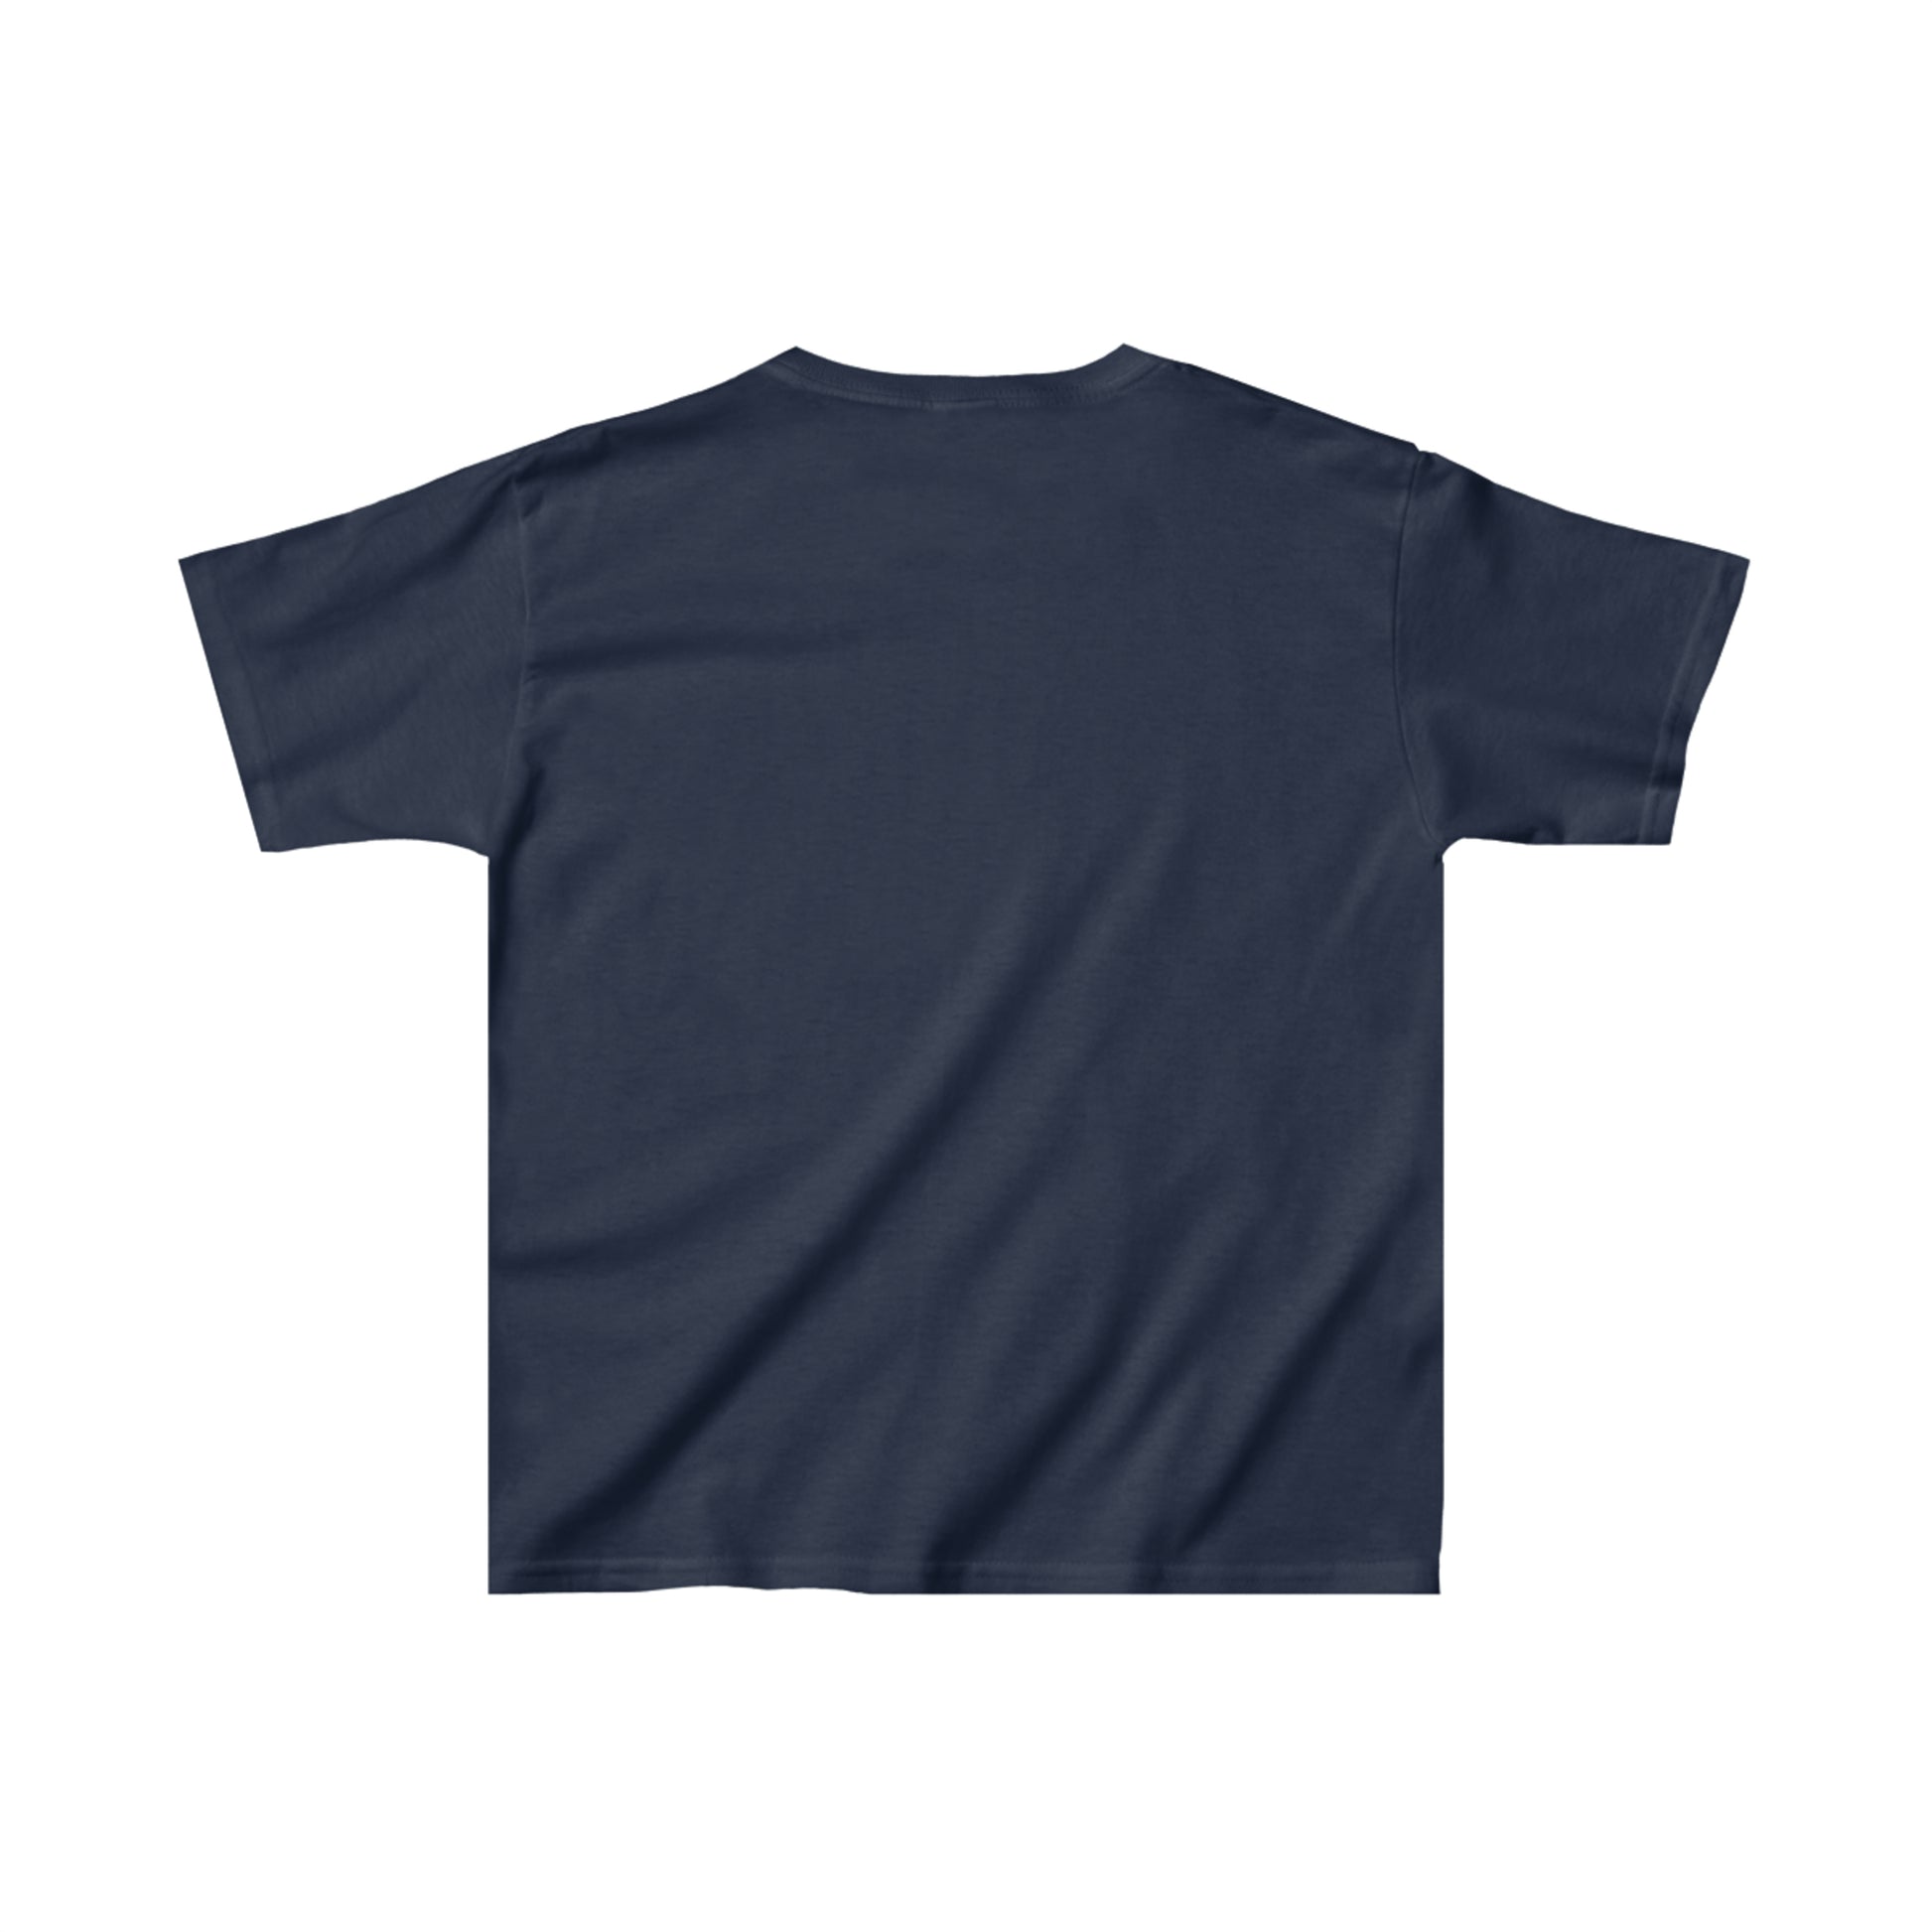 a dark blue t - shirt with a white background